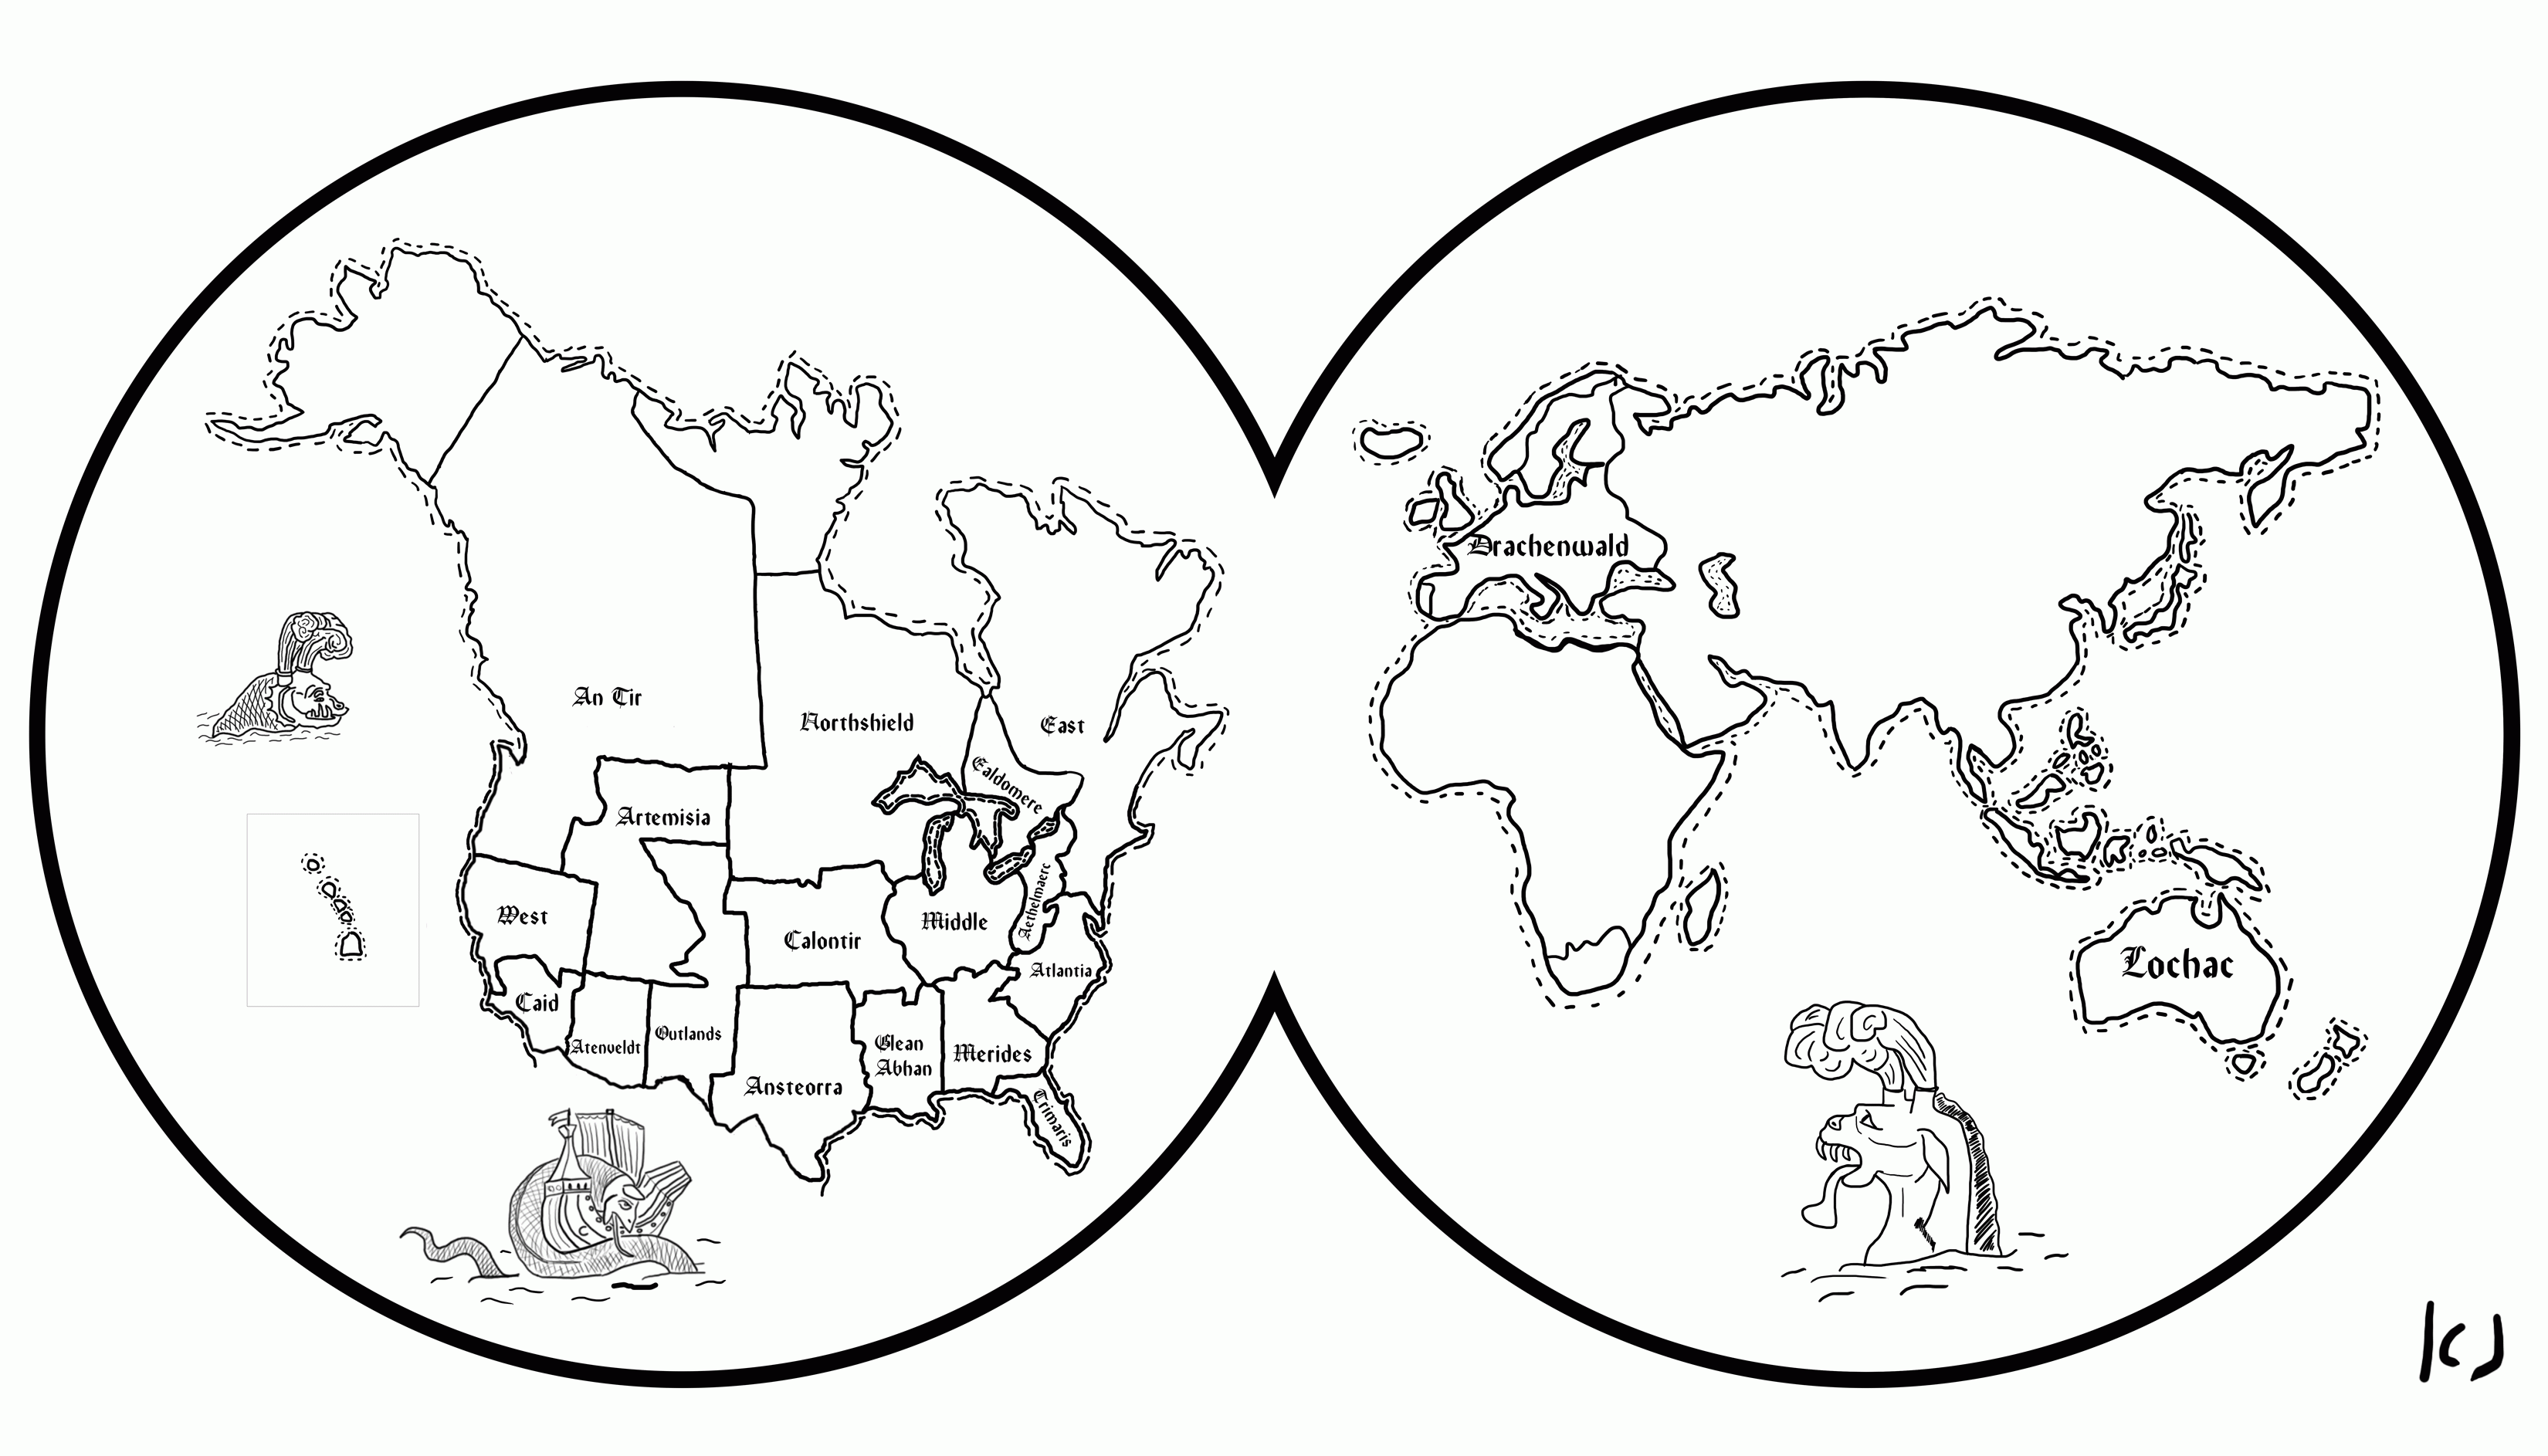 free-world-map-coloring-page-for-kids-download-free-world-map